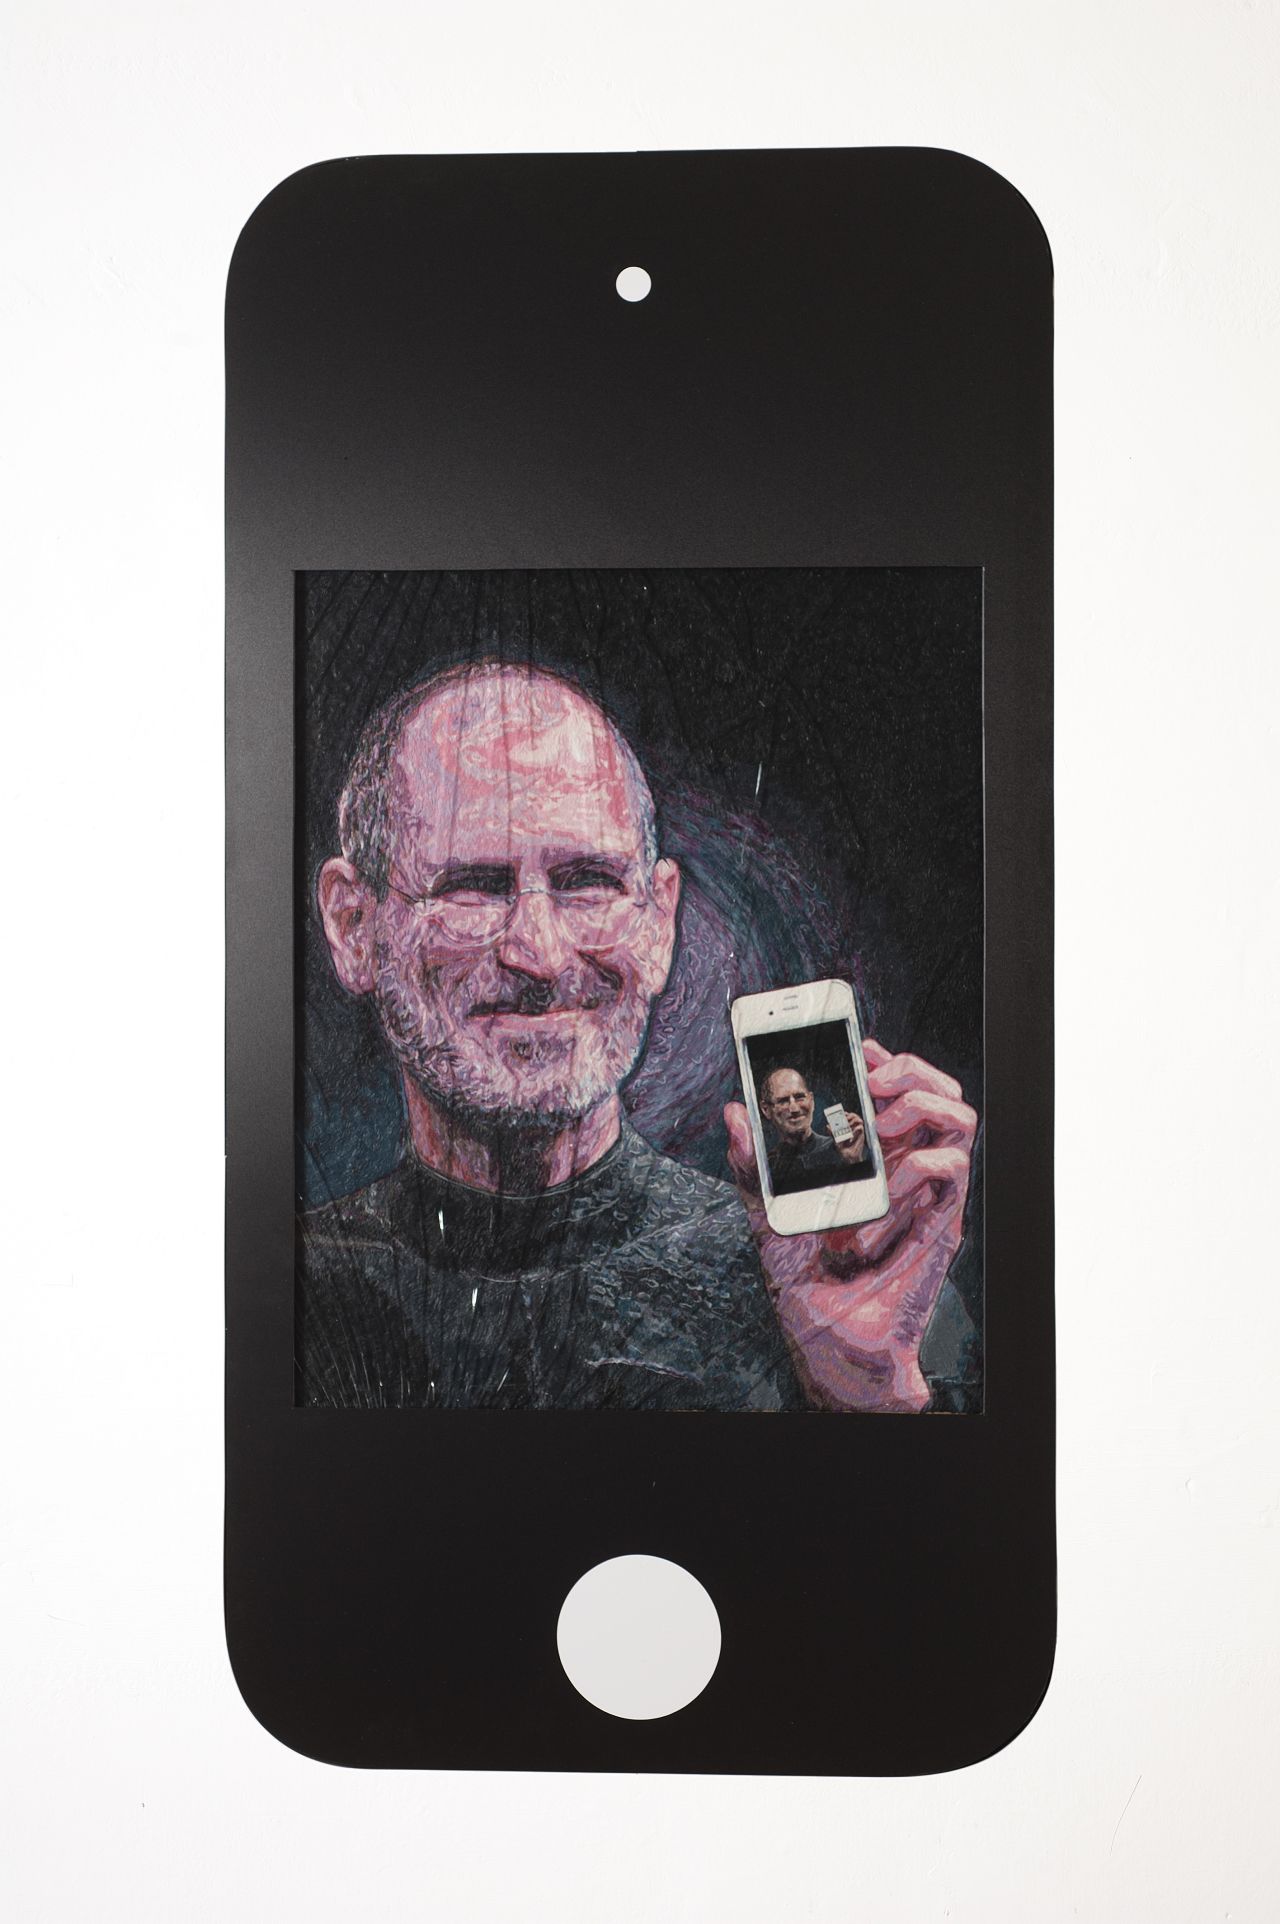 Framed by a faux-iPhone, "Steve" is one of the artist's micro-mosaics, large and detailed works comprised of dyed gum.